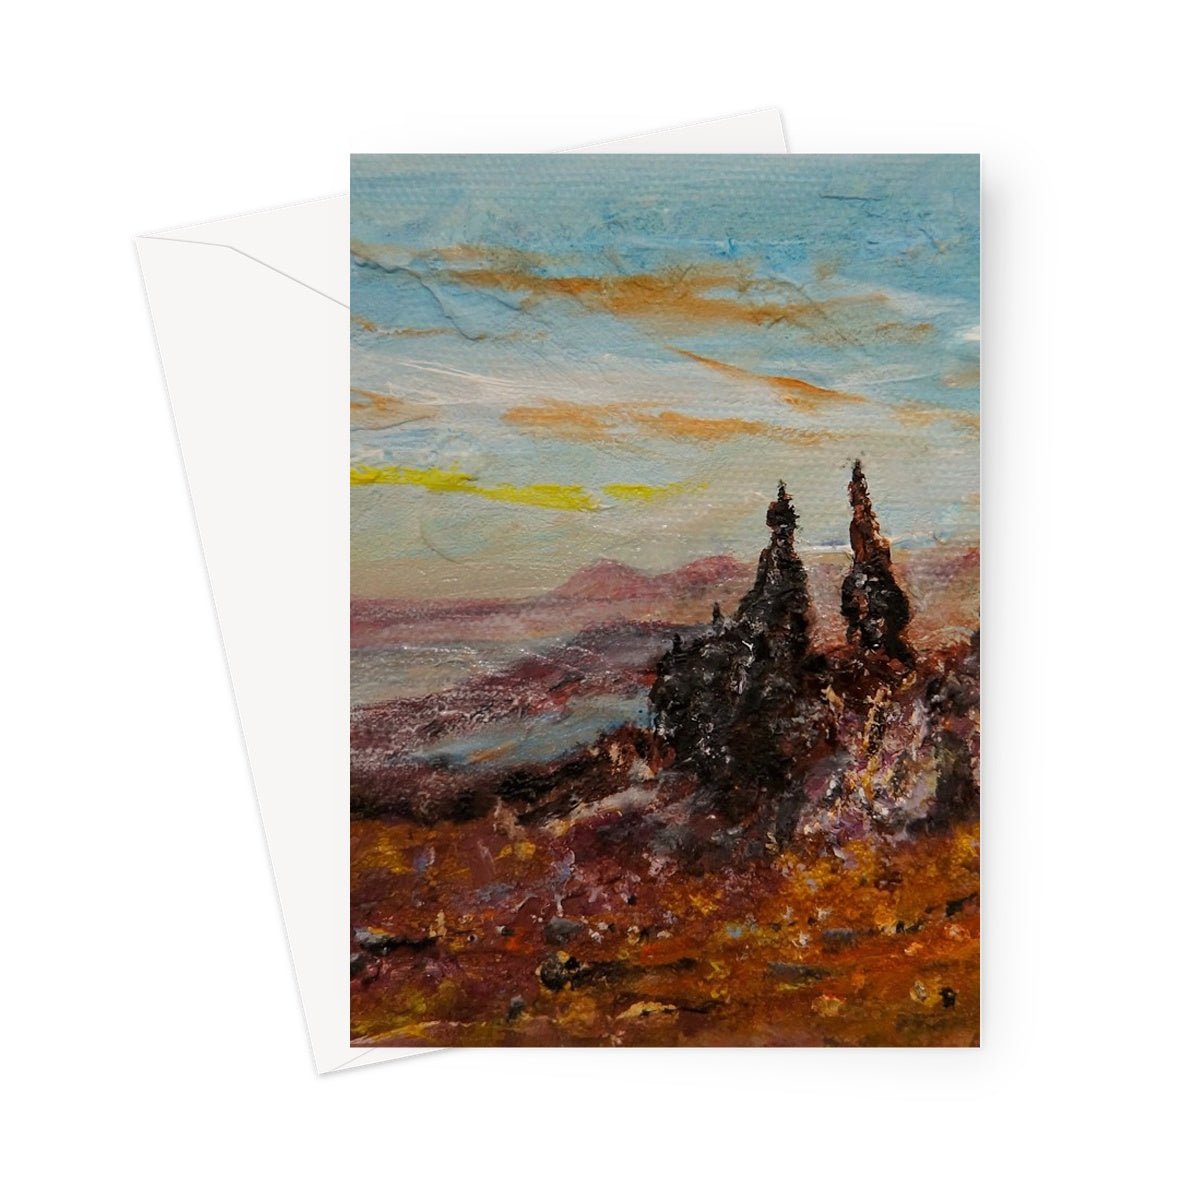 The Old Man Of Storr Skye Art Gifts Greeting Card-Greetings Cards-Skye Art Gallery-5"x7"-1 Card-Paintings, Prints, Homeware, Art Gifts From Scotland By Scottish Artist Kevin Hunter